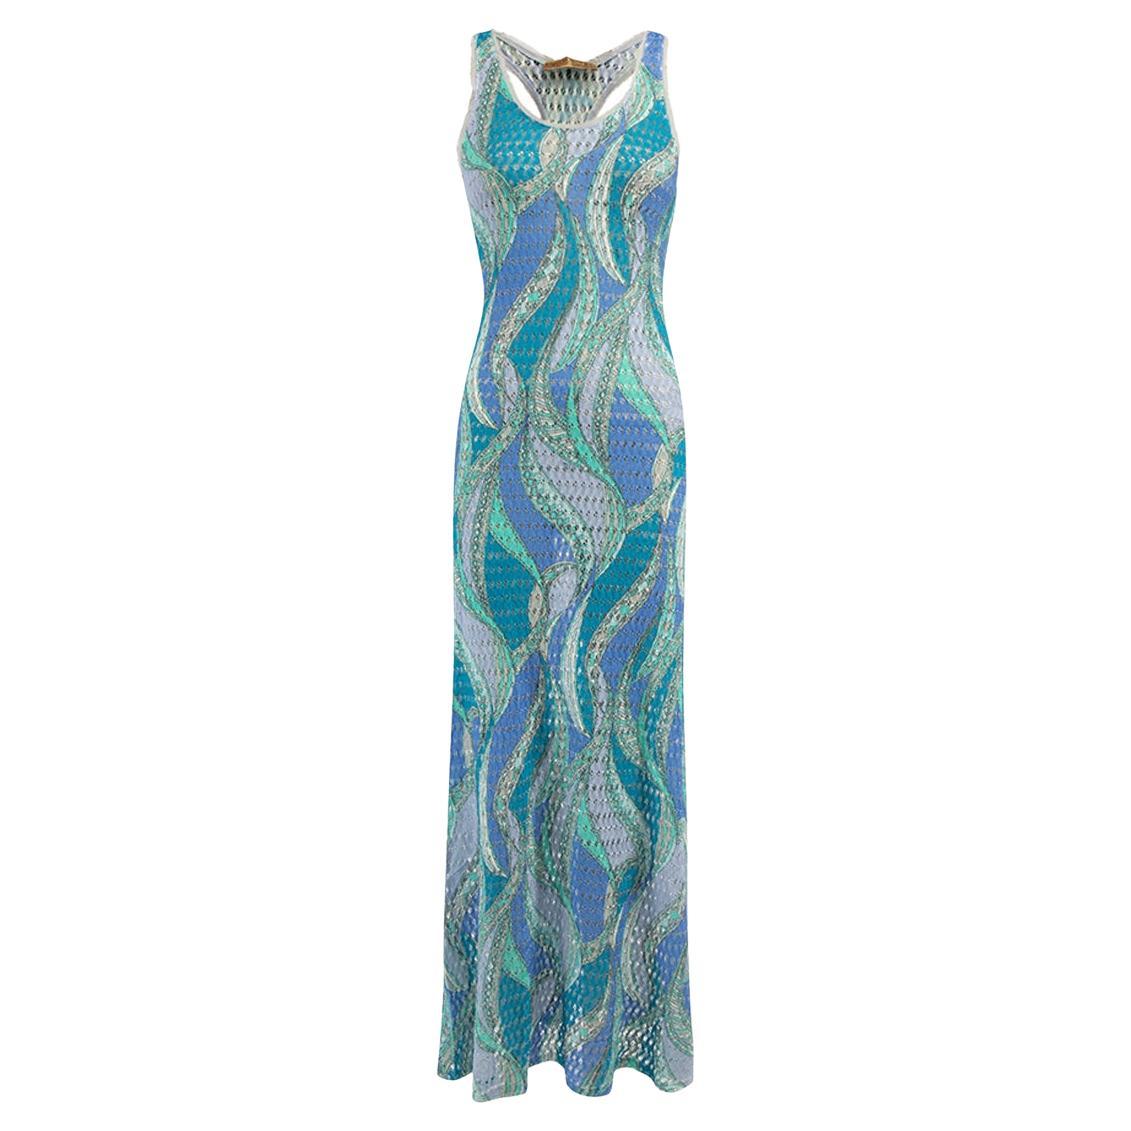 Pre-Loved Emilio Pucci Women's Blue Tone Abstract Pattern Maxi Dress